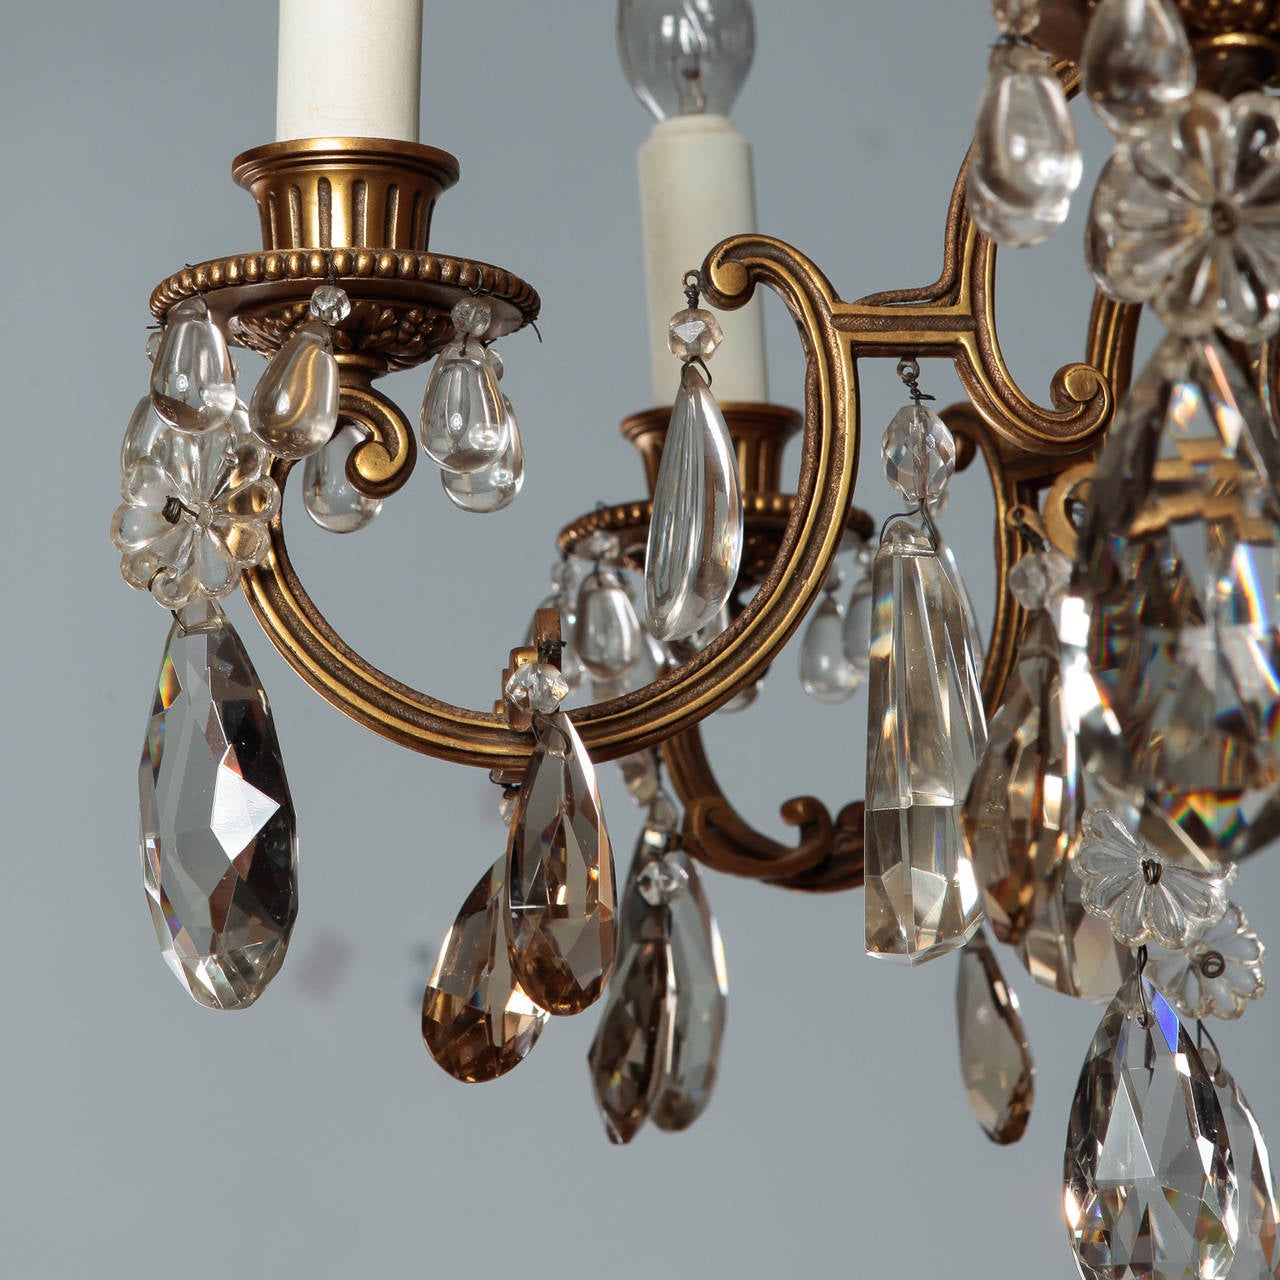 Circa 1900 French chandelier with gilded bronze frame with six candle style lights and clear crystal pendants. New wiring for US electrical standards.